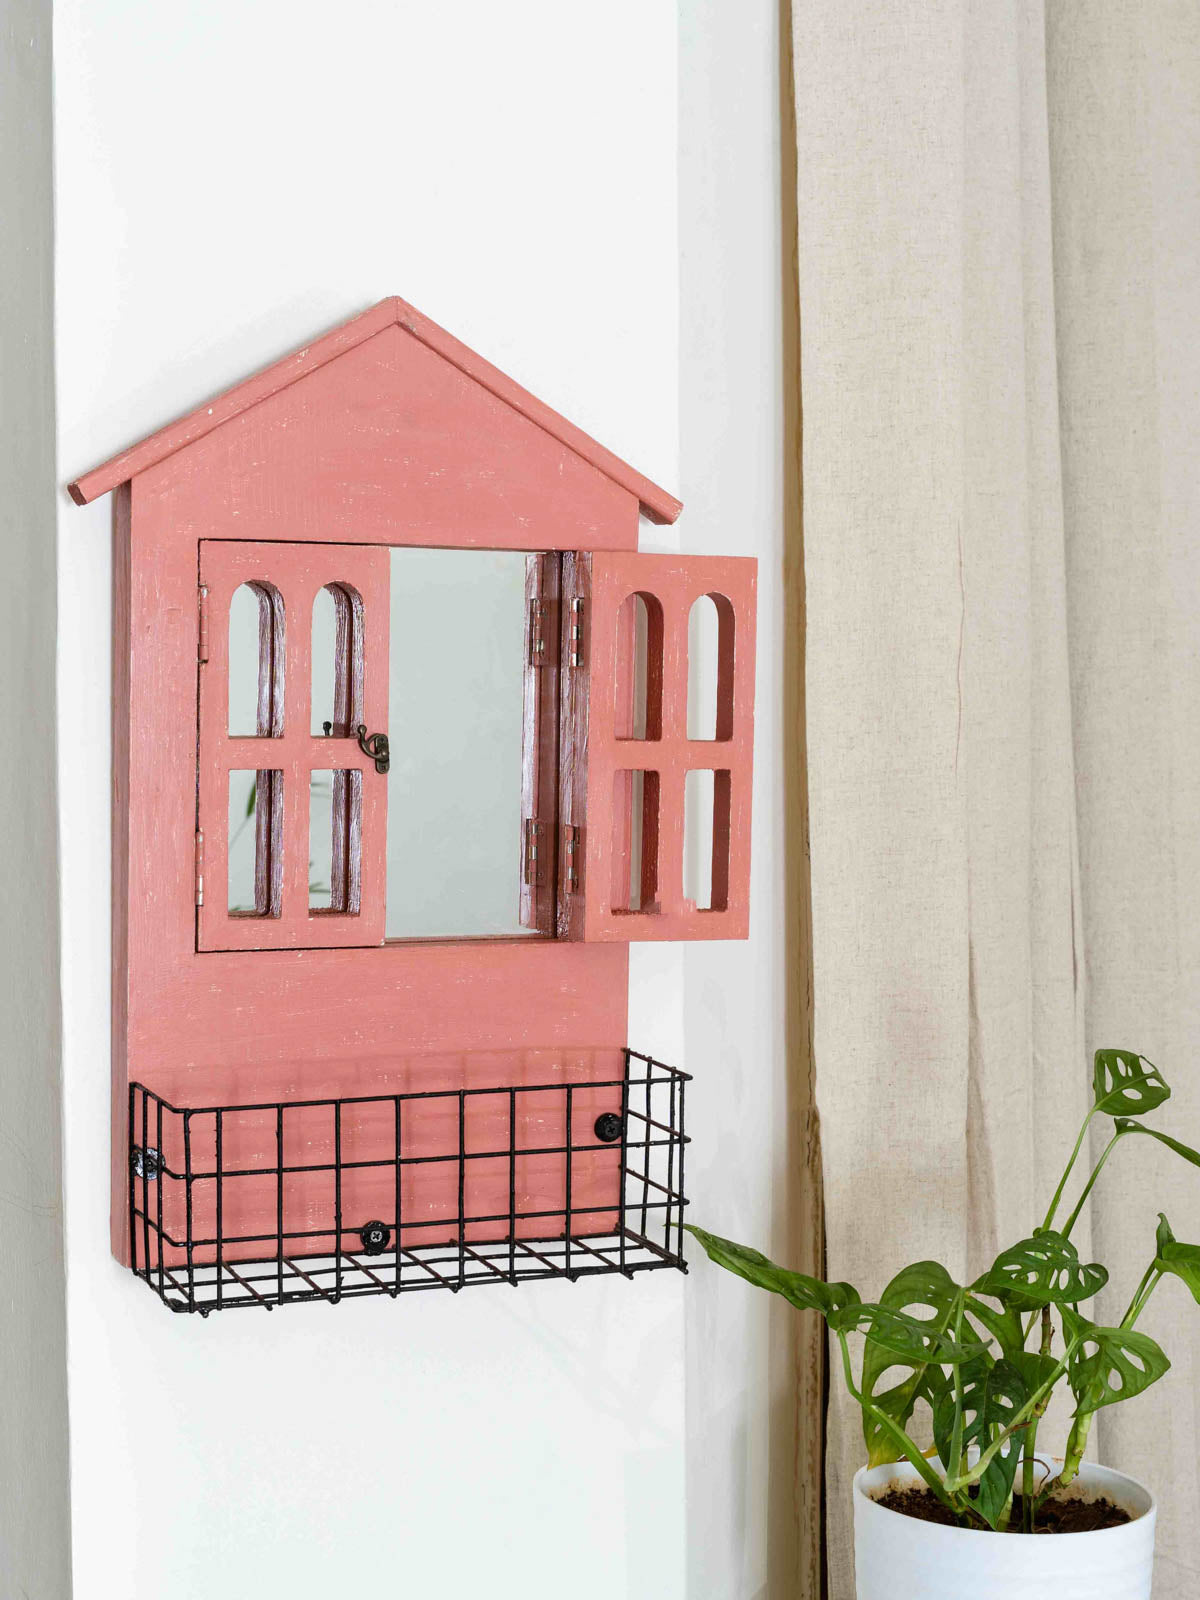 House Mirror Window Frame With Basket - Terracotta